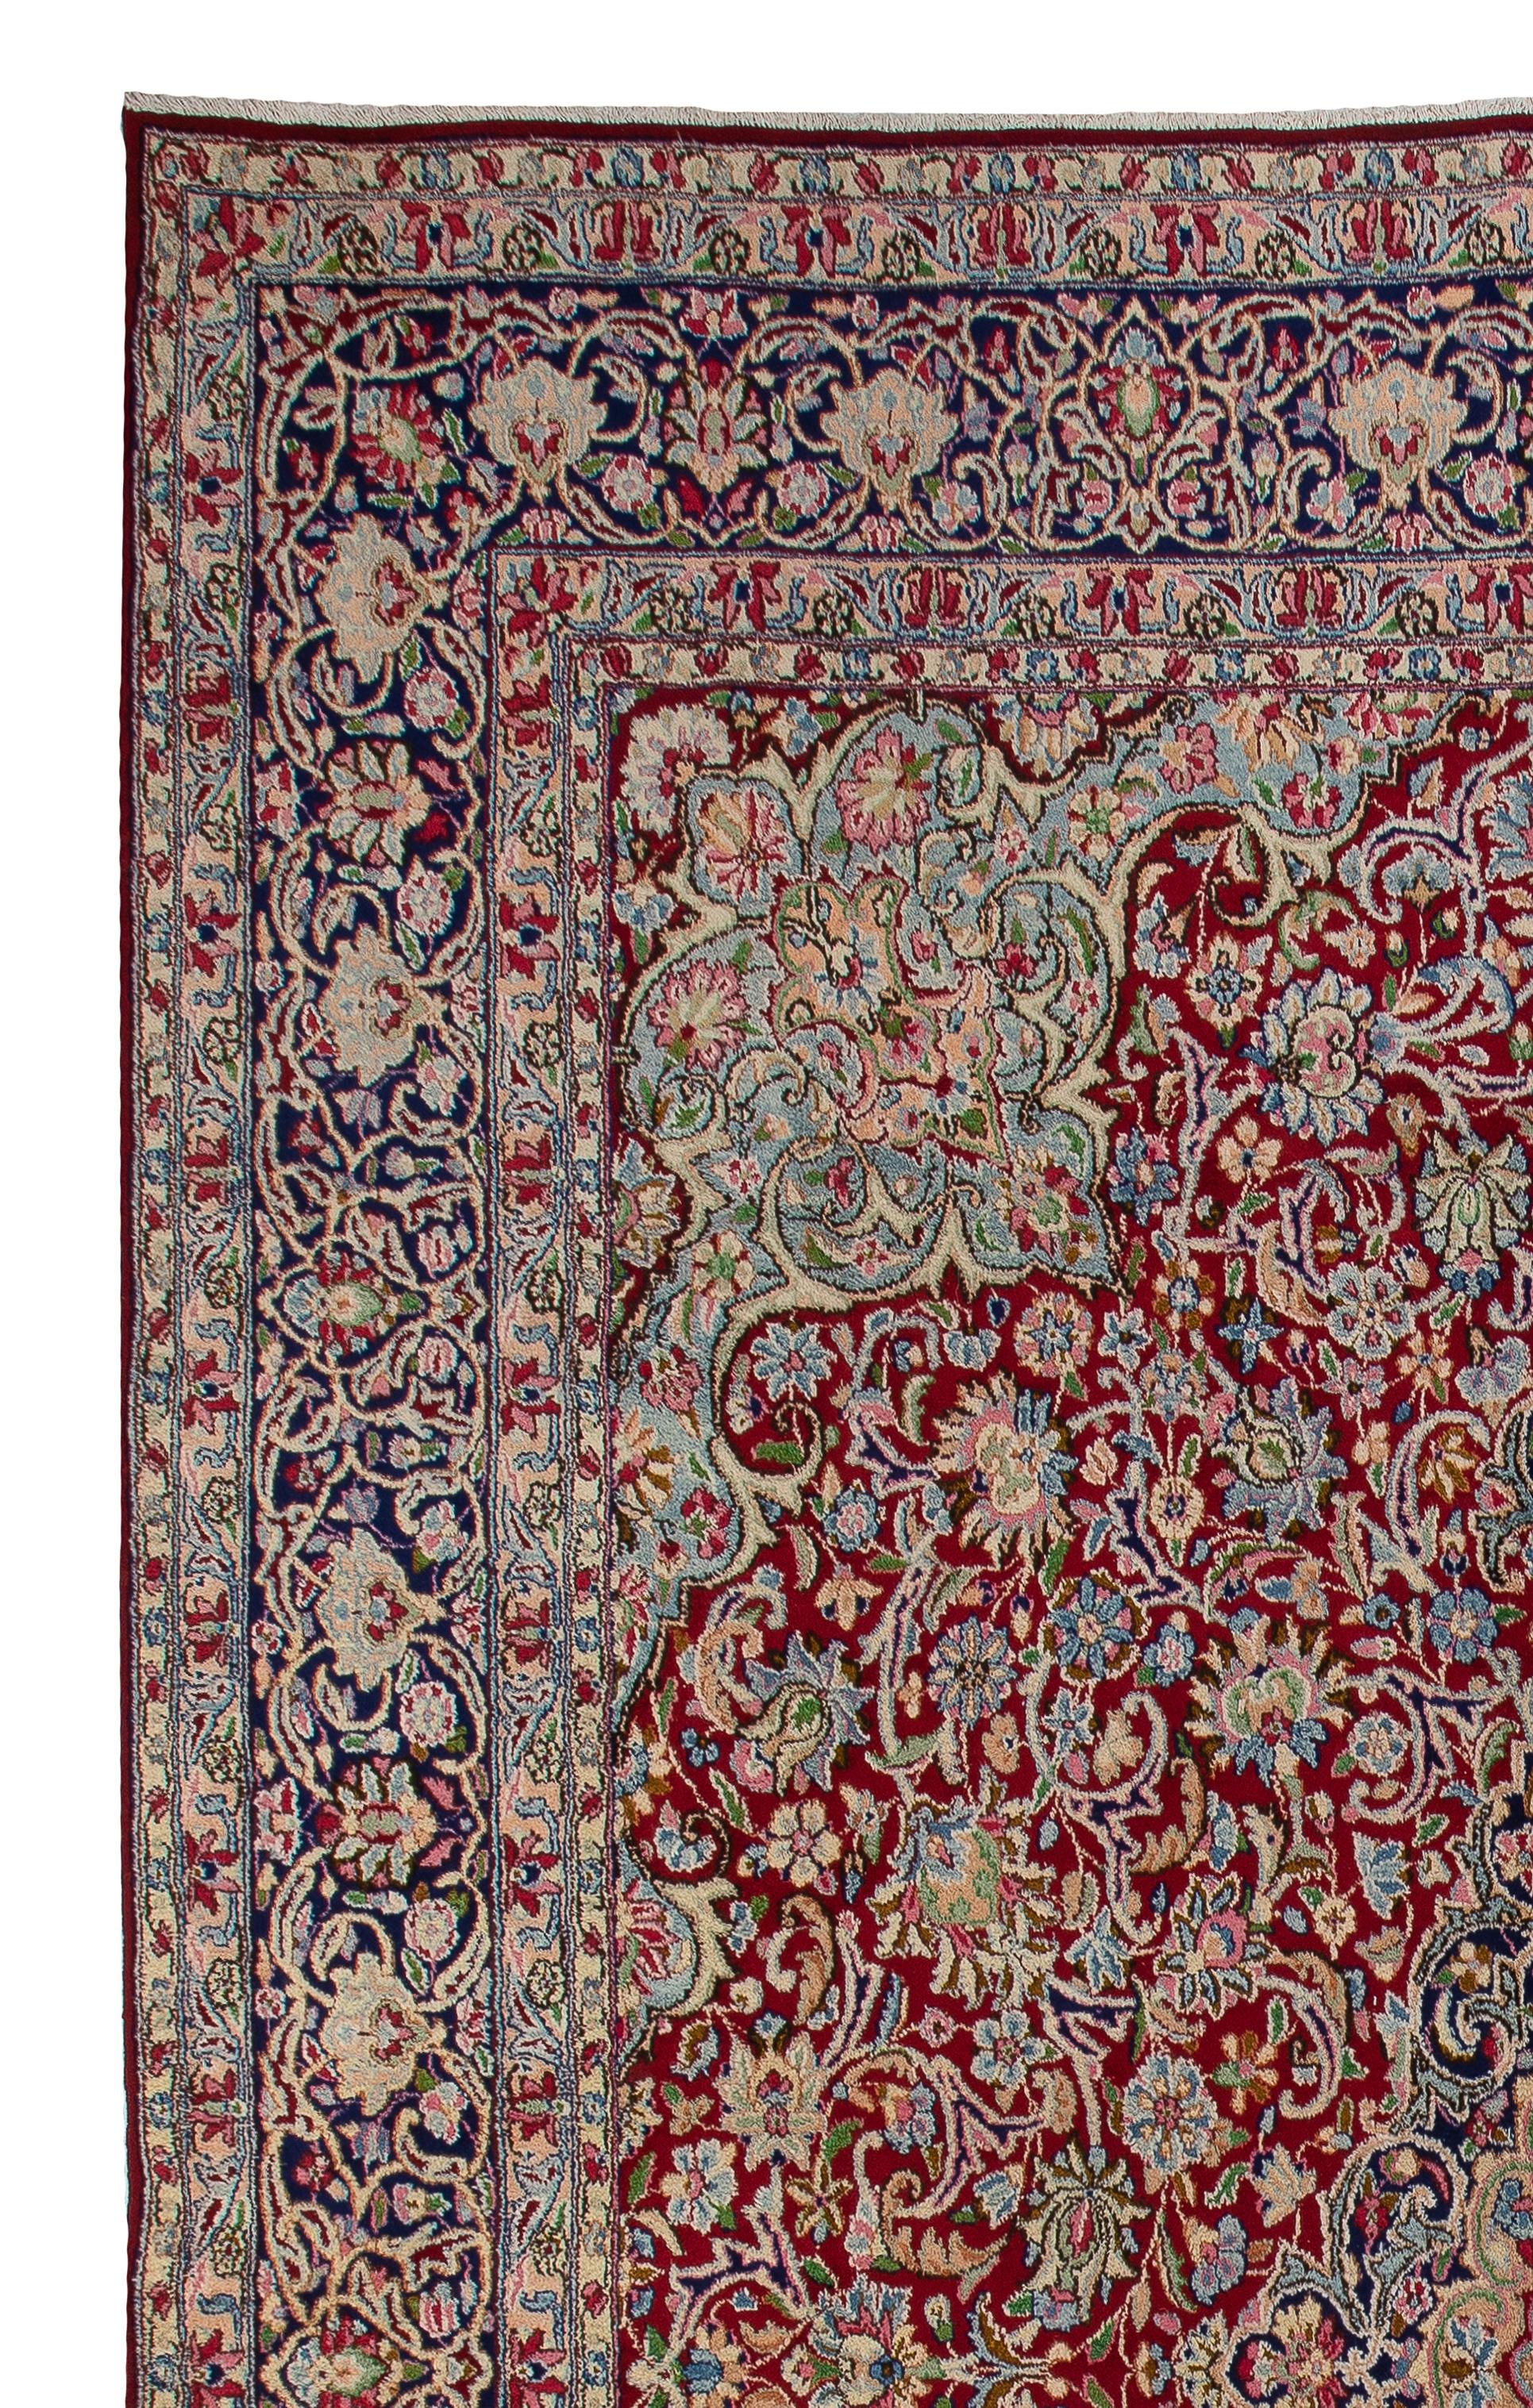 Antique Persian Kashan rug. Fine Traditional Oriental carpet.
 Finely hand-knotted with even medium wool pile on cotton foundation. Very good condition. Sturdy and suitable for both residential and commercial interiors. Professionally washed.